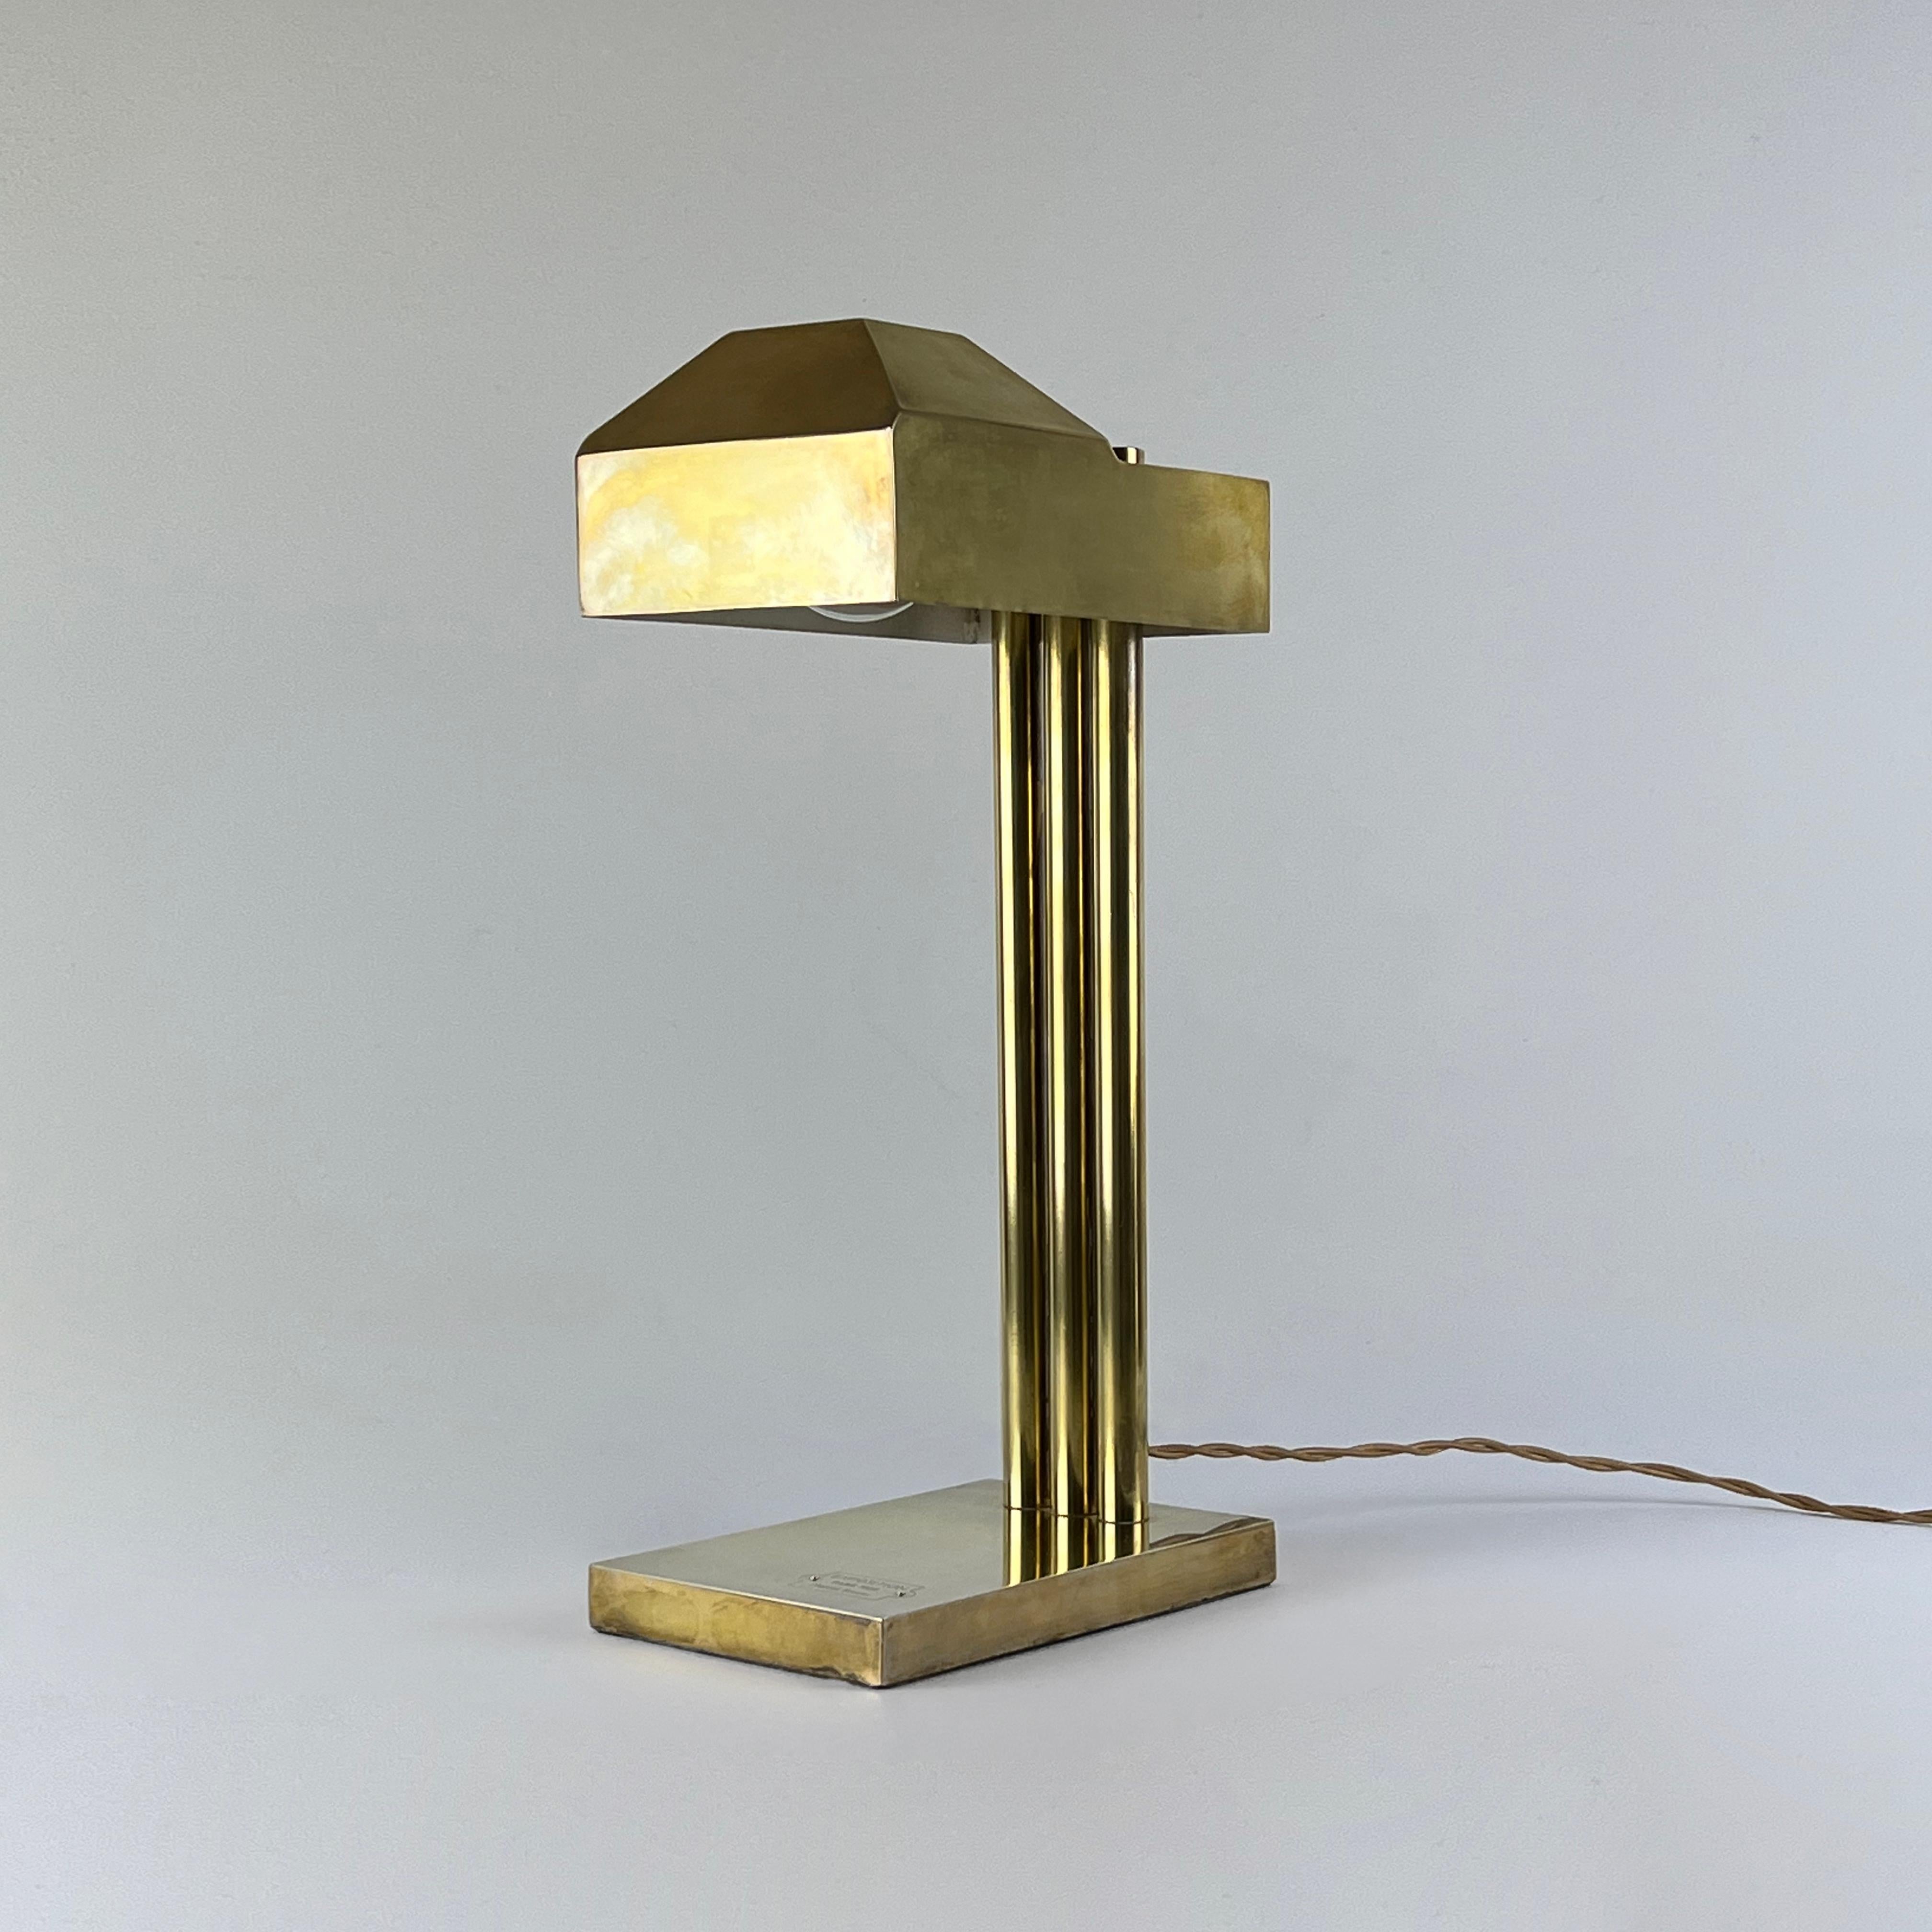 Brass Table Lamp by Marcel Breuer, 1925, Marked 1